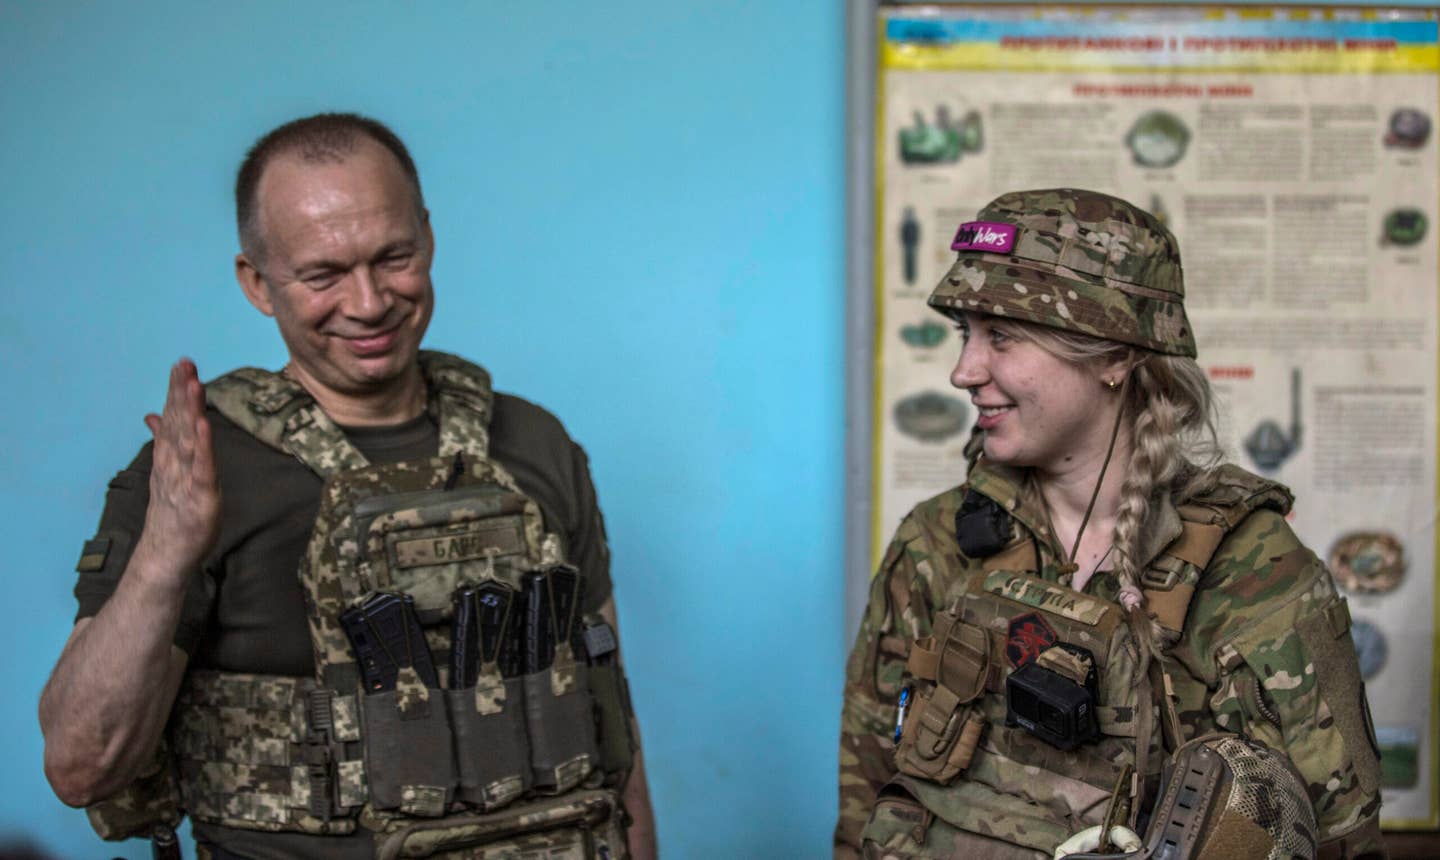 Oleksandr Syrskyi (left), the commander of the Ukrainian Ground Forces, awards Ukrainian fighters of the 10th Mountain Assault Brigade “Edelweiss” in the Soledar direction on July 2, 2023, in the Donetsk region, Ukraine. <em>Photo by Yuriy Mate/Global Images Ukraine via Getty Images</em>